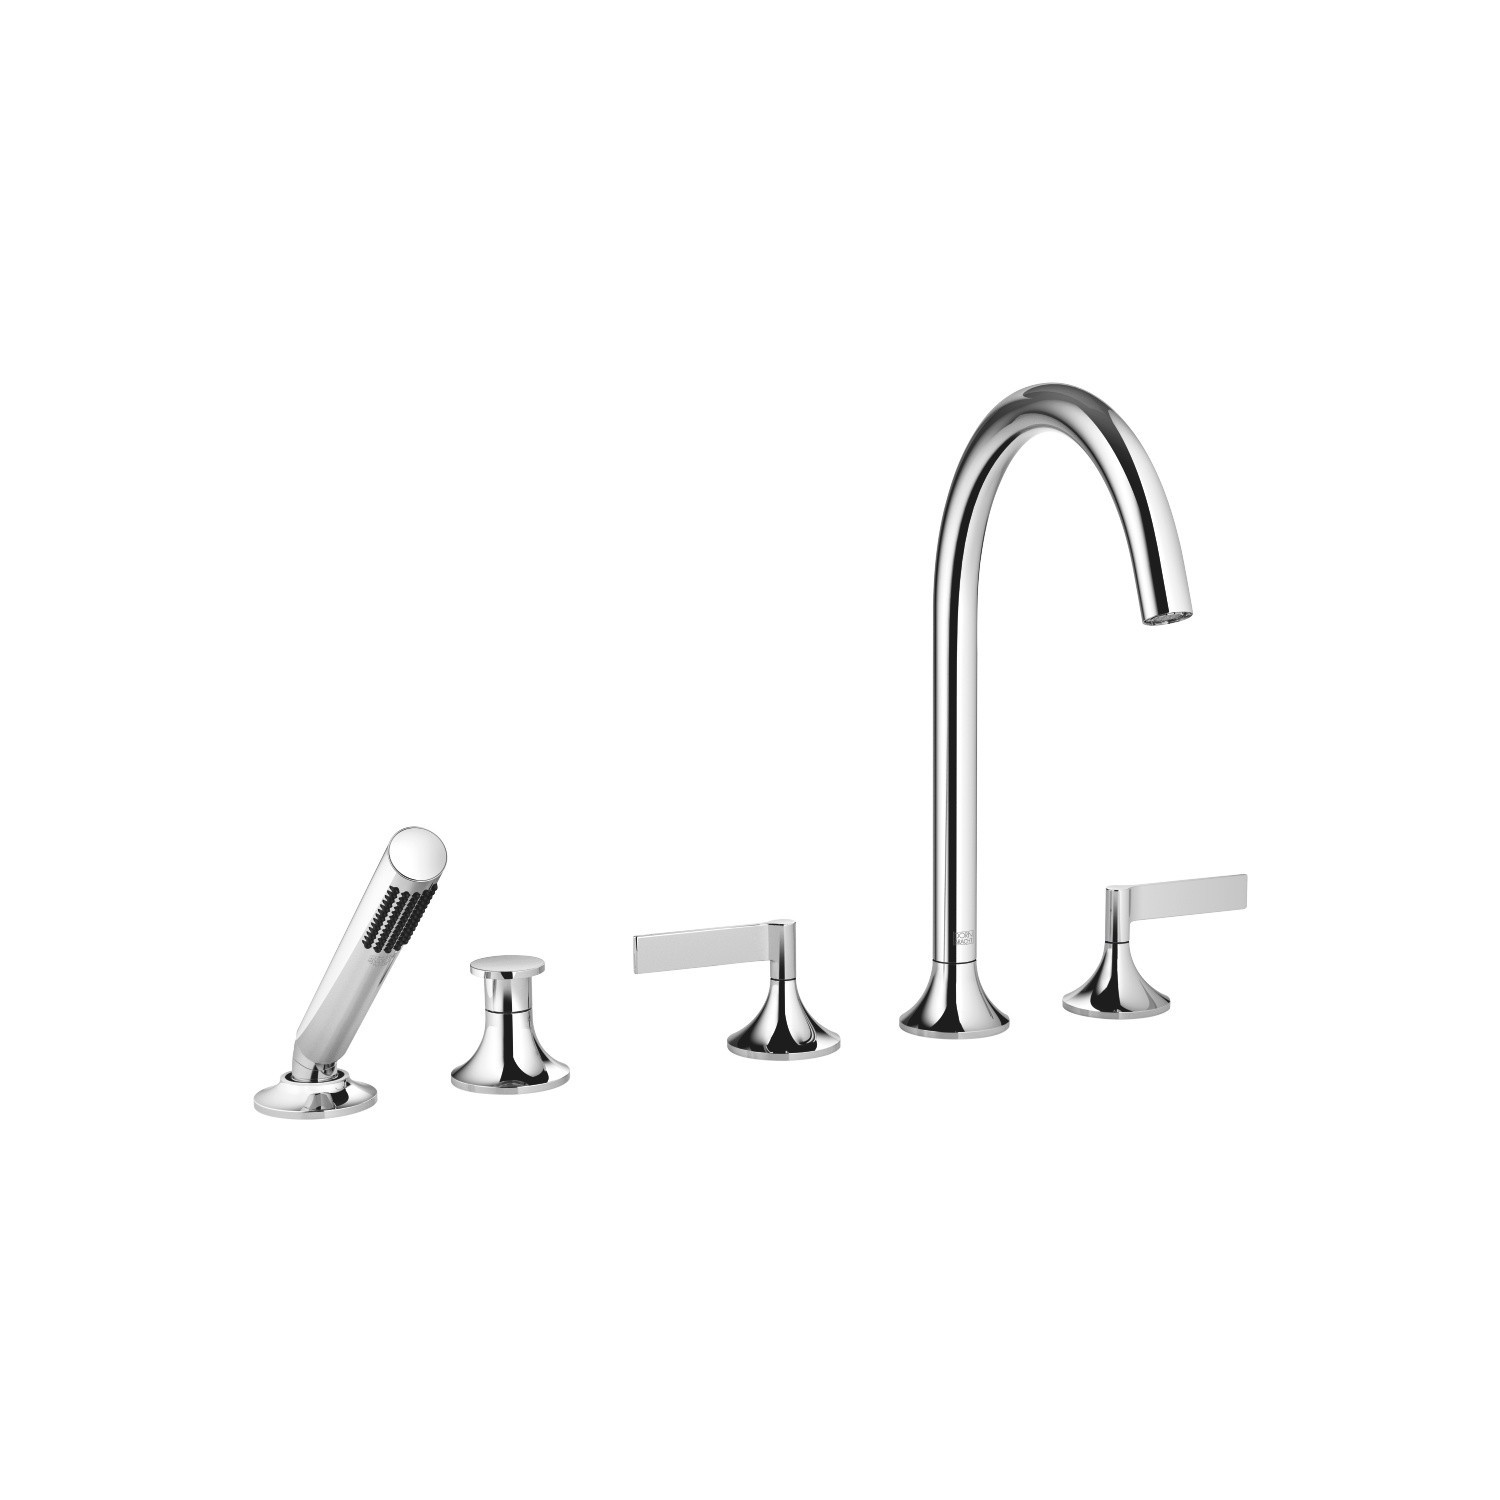 DORNBRACHT 27522819 VAIA FIVE HOLES WIDESPREAD DECK MOUNT TUB FILLER WITH HAND SHOWER AND BLADE HANDLES